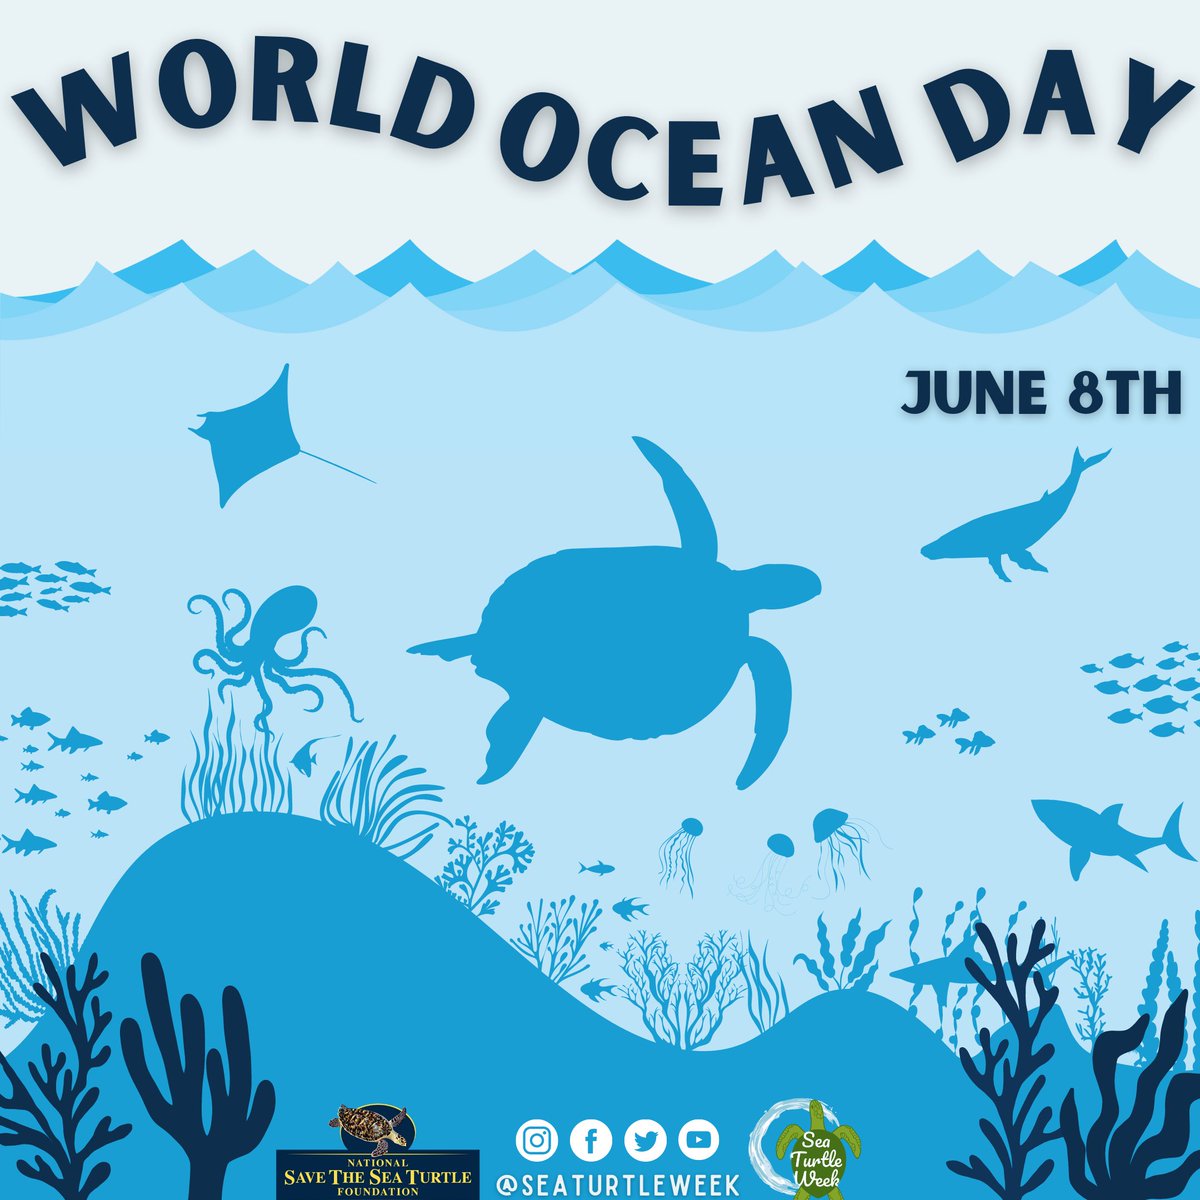 We are ready to swim into #WorldOceanDay and the first day of #SeaTurtleWeek! 💙🌎🌊✨

Tell us what your favorite thing about the ocean is below!

🌍The 2023 World Ocean Day goal is to protect at least 30% of our blue planet by 2030 (”30x30”).

#Protect30x30